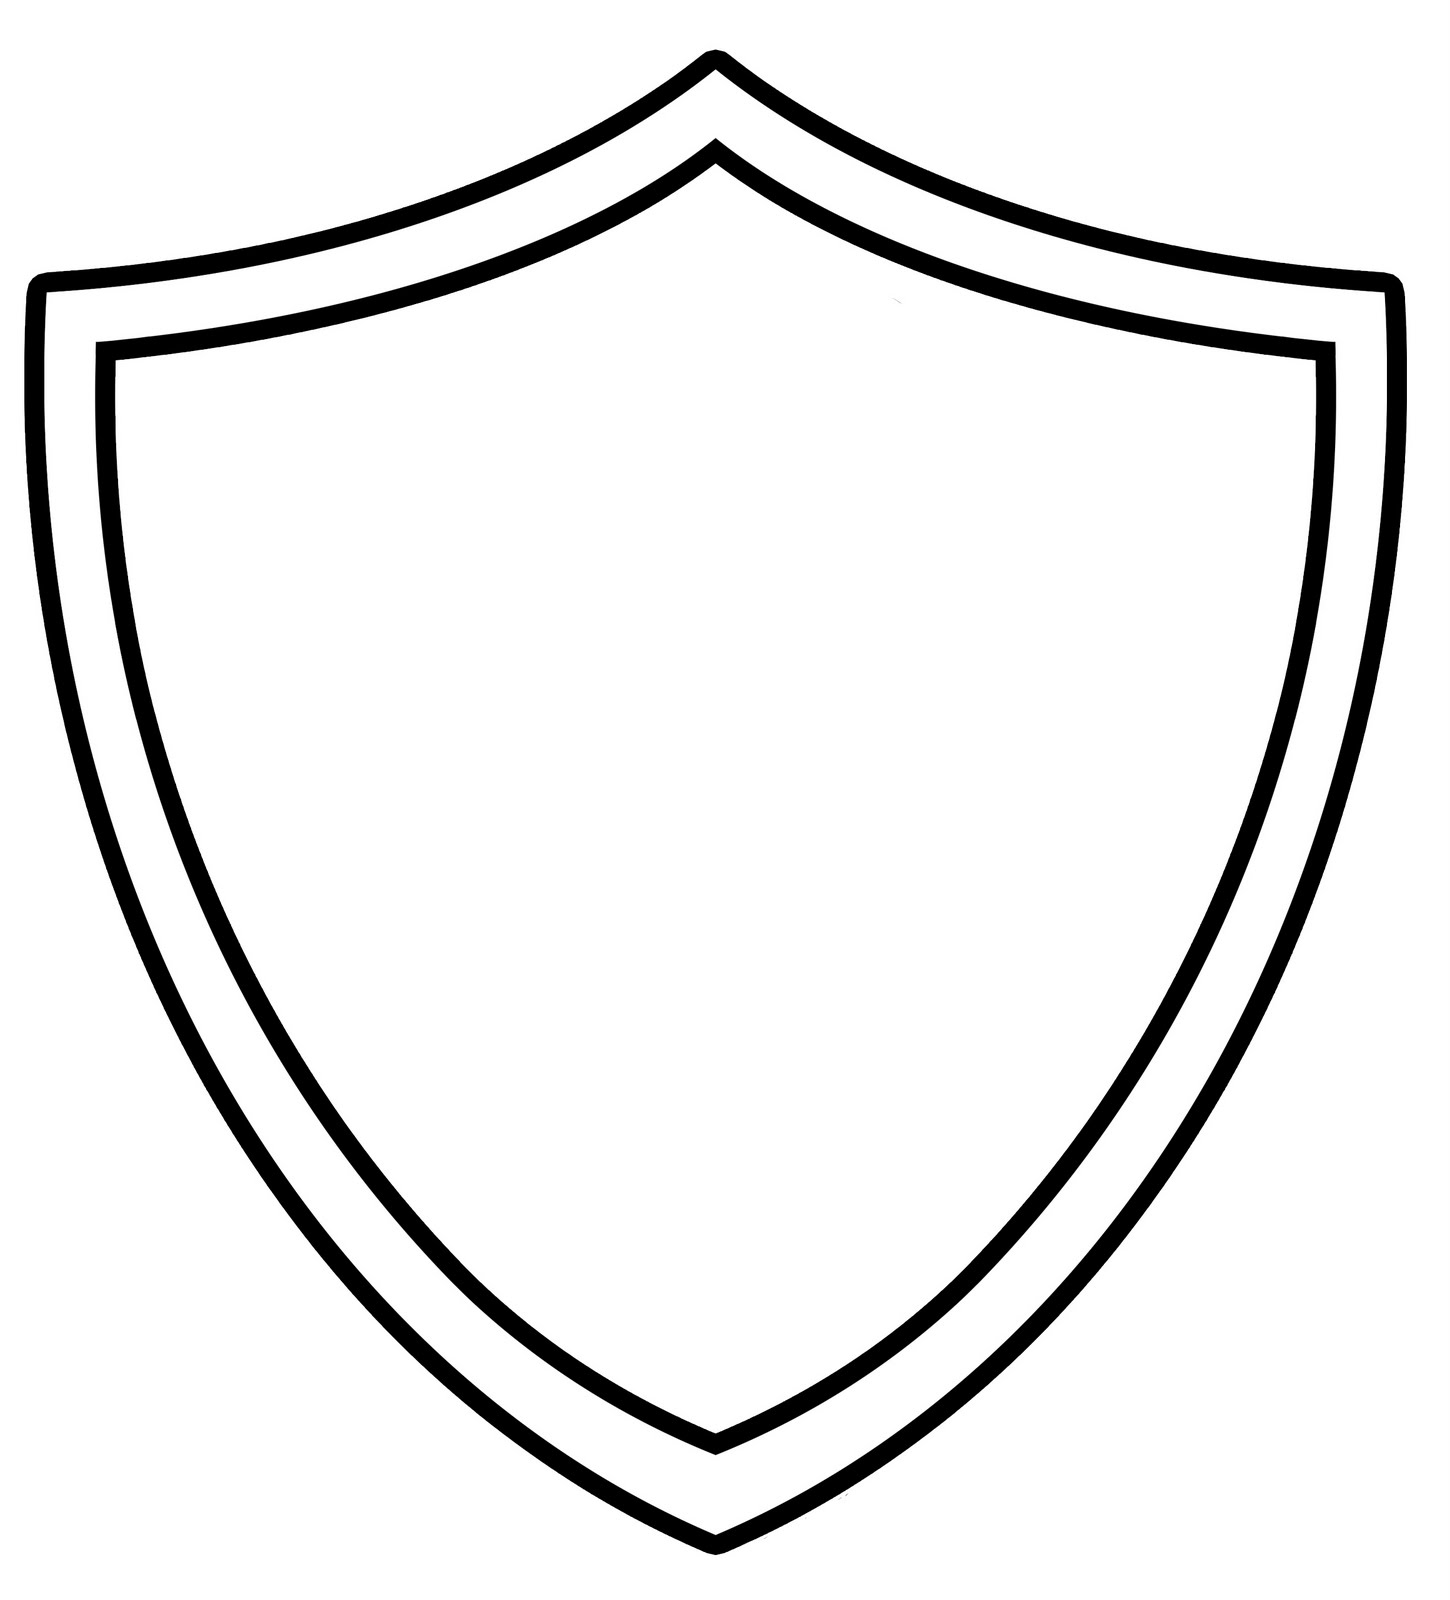 10 Superhero Shield Blank Free Cliparts That You Can Download To You    